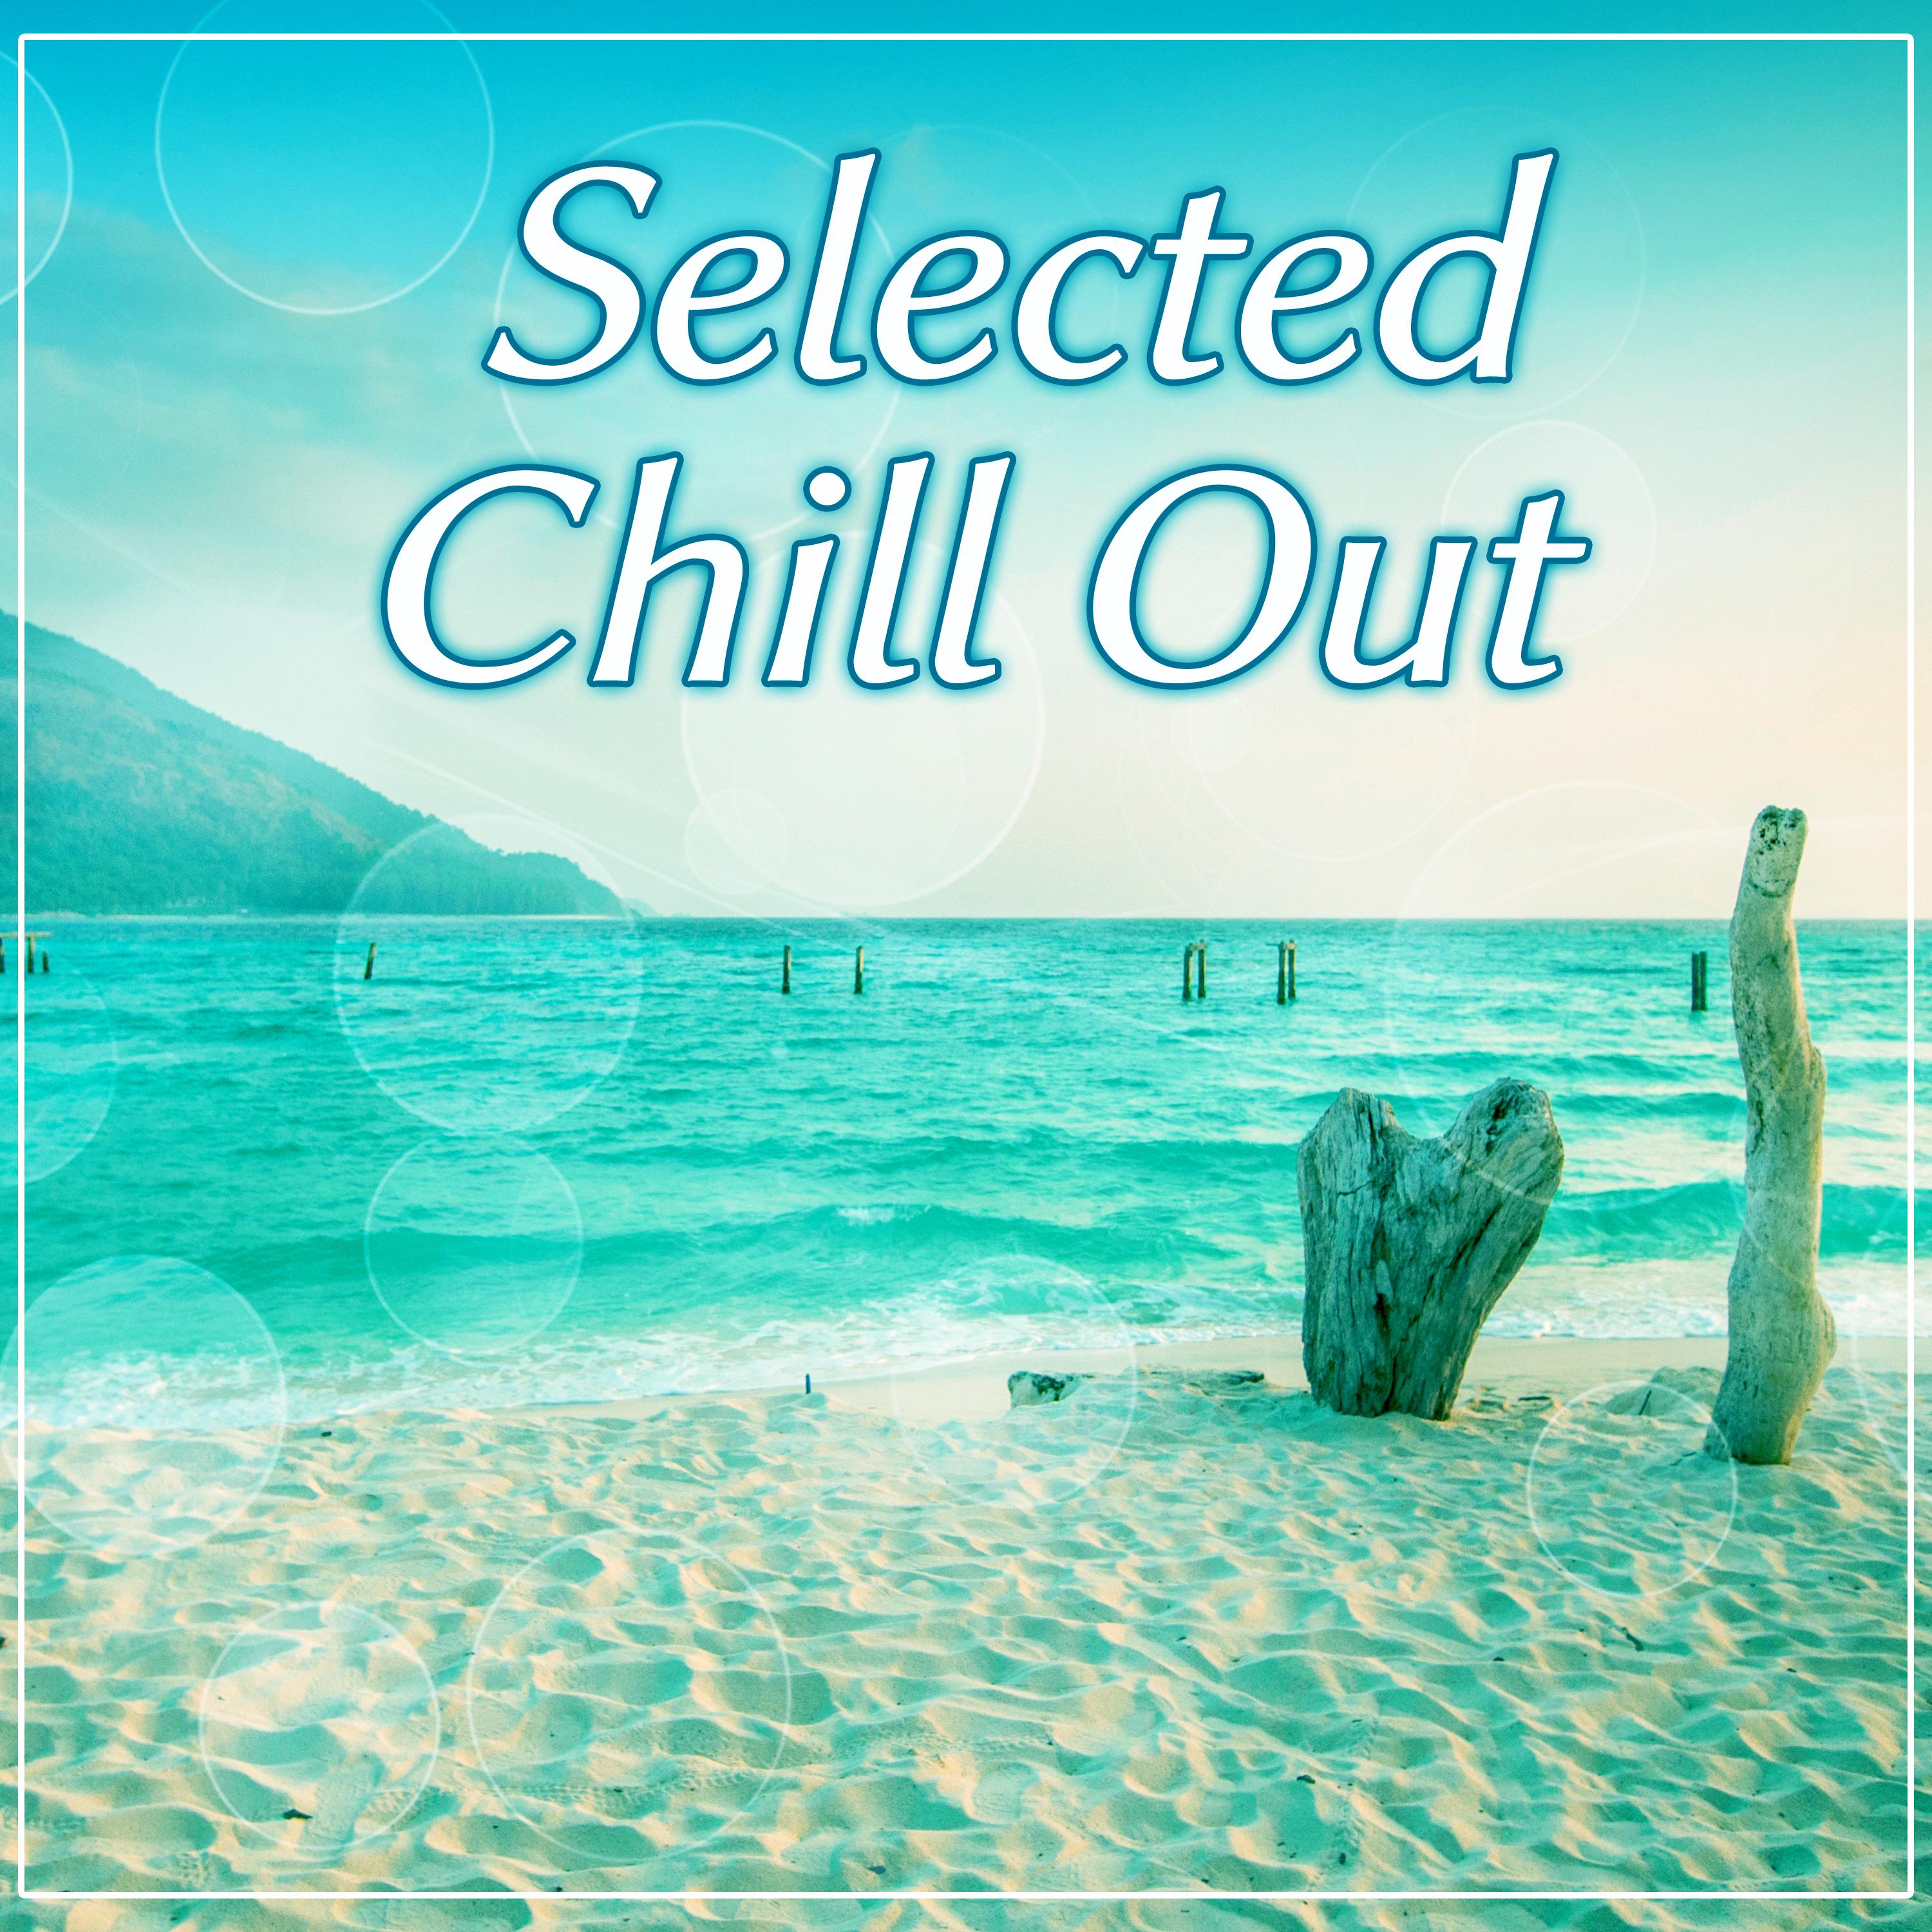 Selected Chill Out – Ambient Electronic Music, Ibiza Selected Chill Out, Finest Selection, Rest, Chill  Out 2016, Bar Lounge